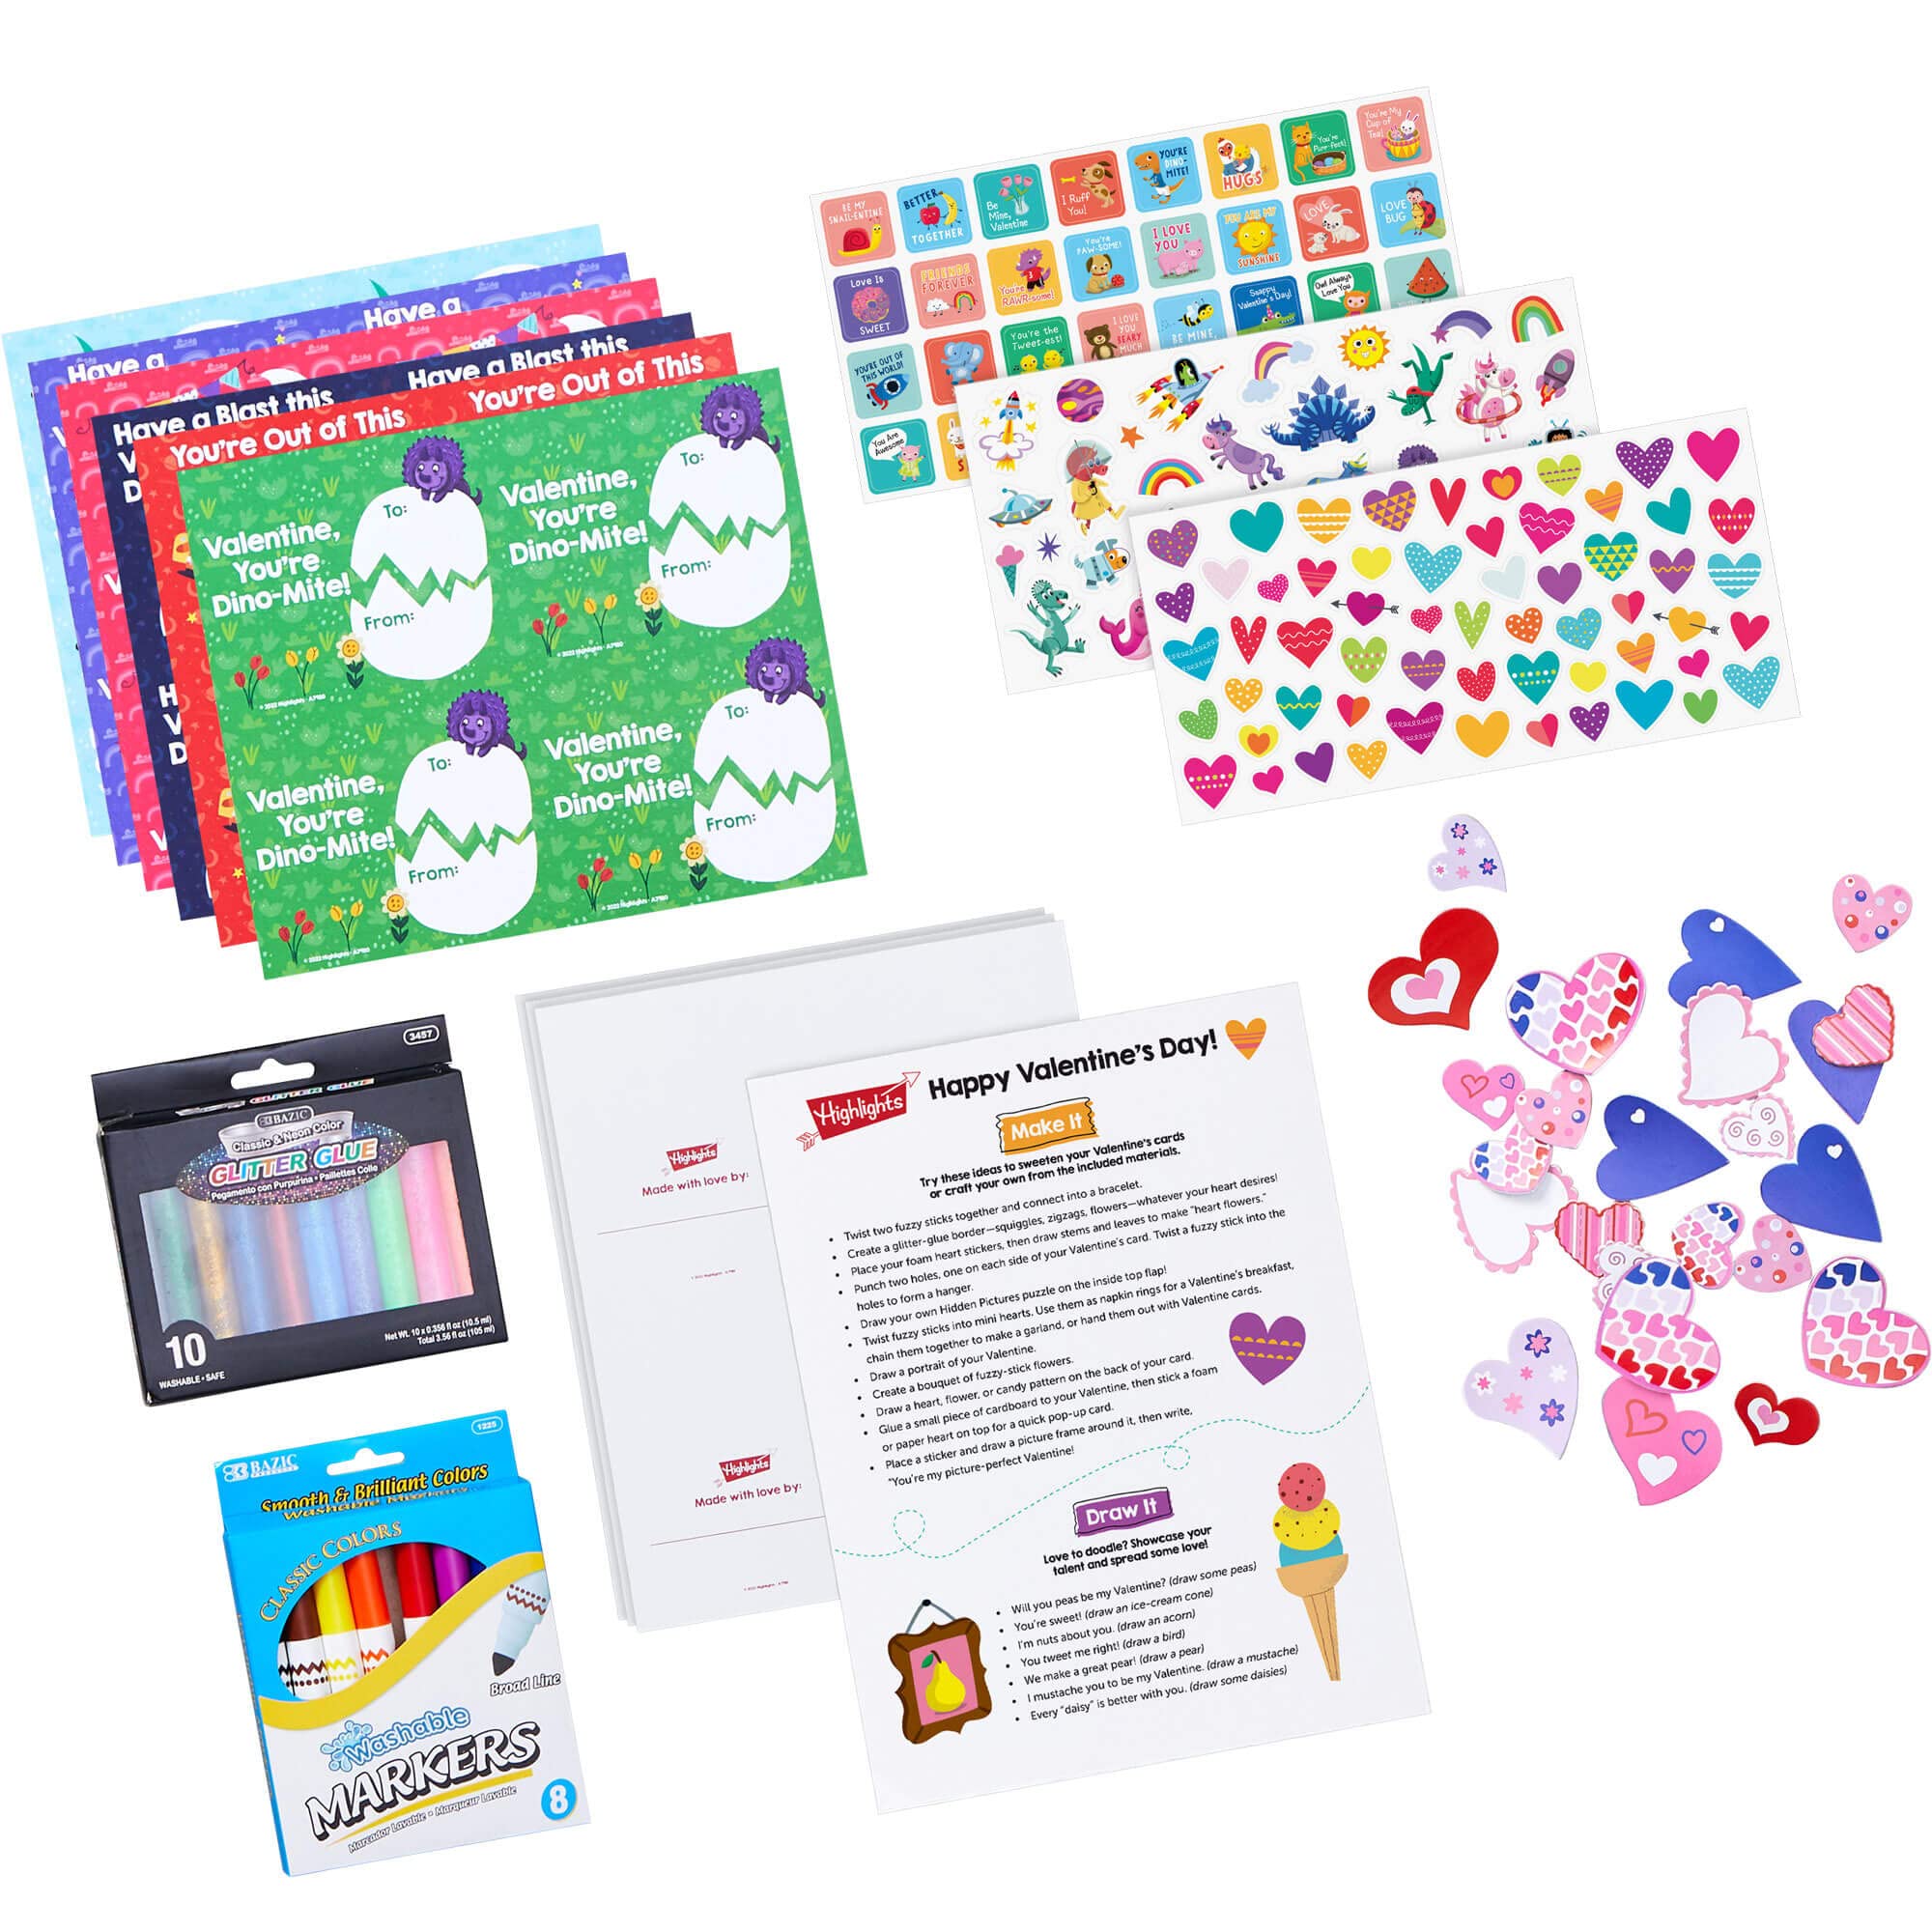 Highlights for Child Highlights Valentines Day cards craft Kit for Kids